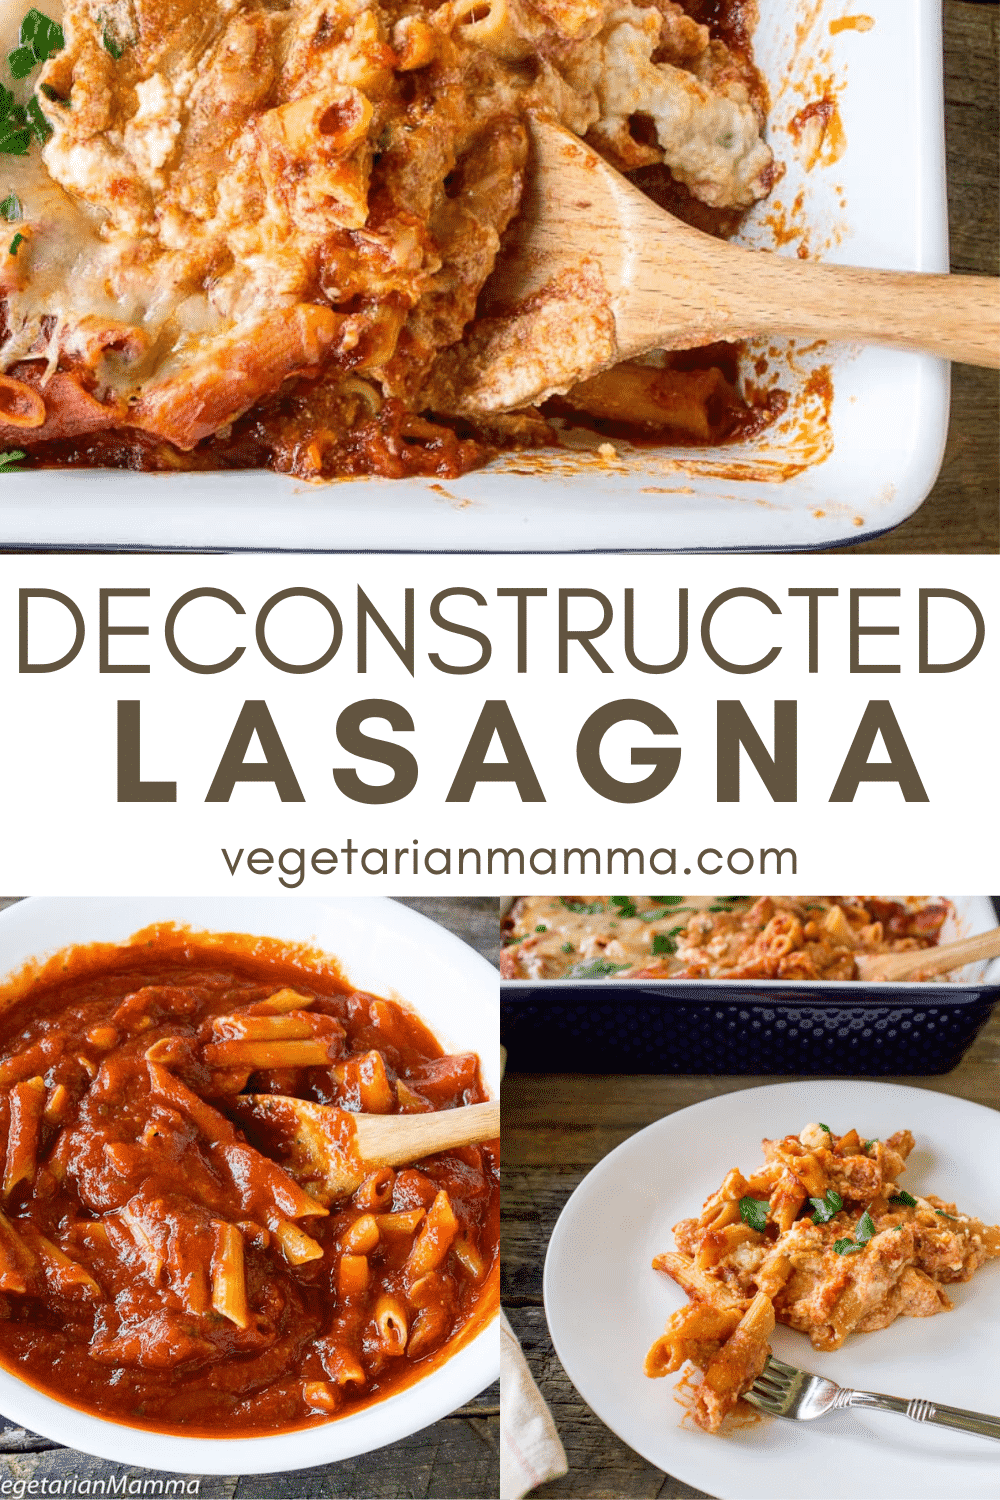 Deconstructed lasagna pinnable image with words